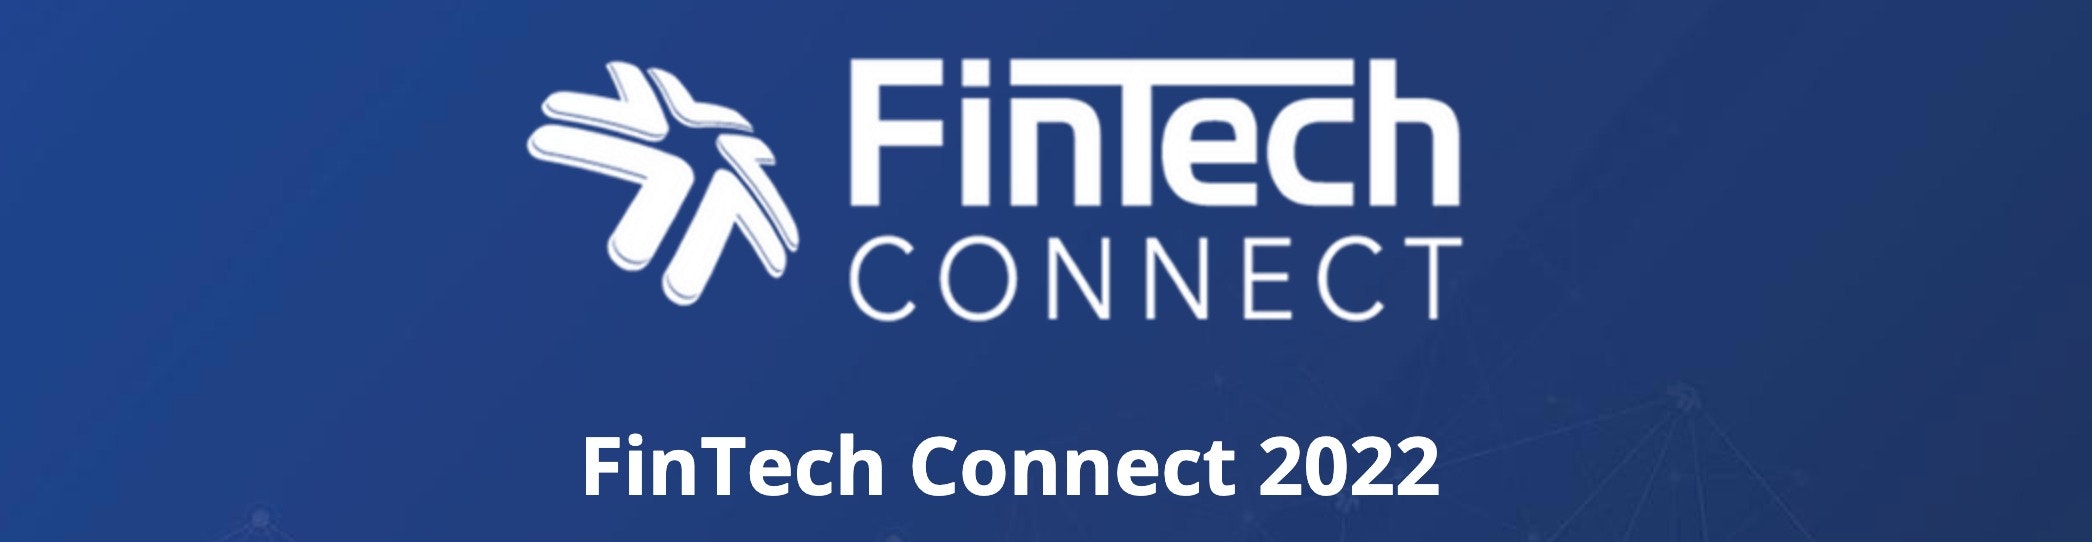 Cover image of Fintech Connect